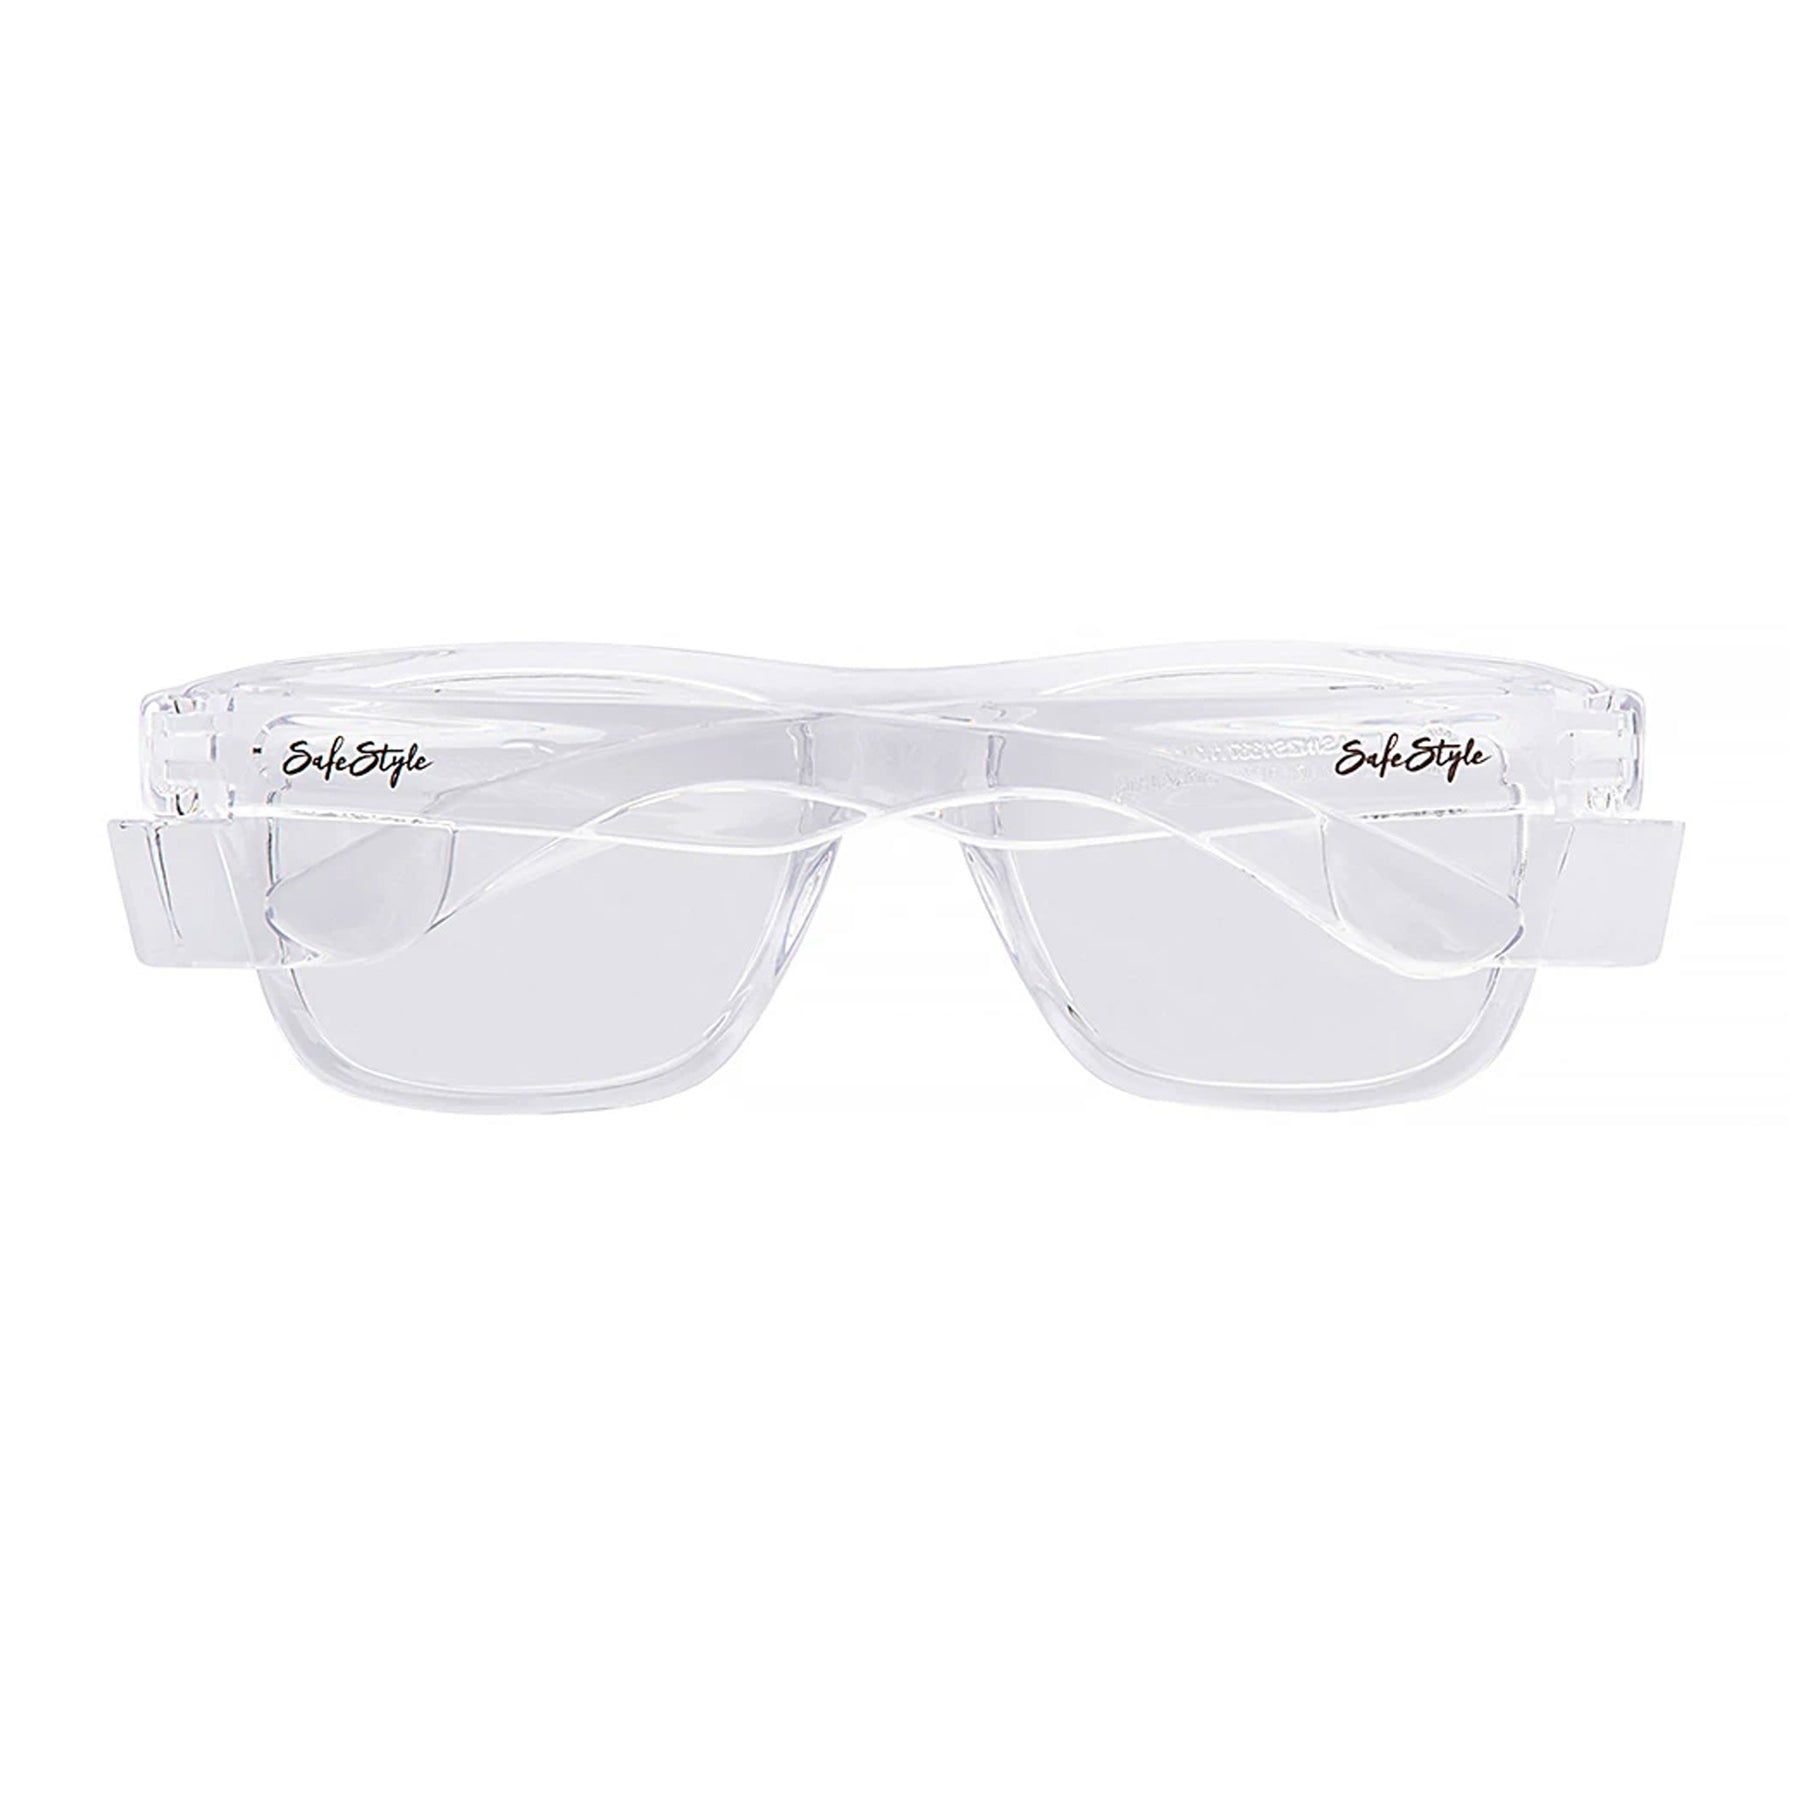 safe style fusions clear frame glasses with clear lens